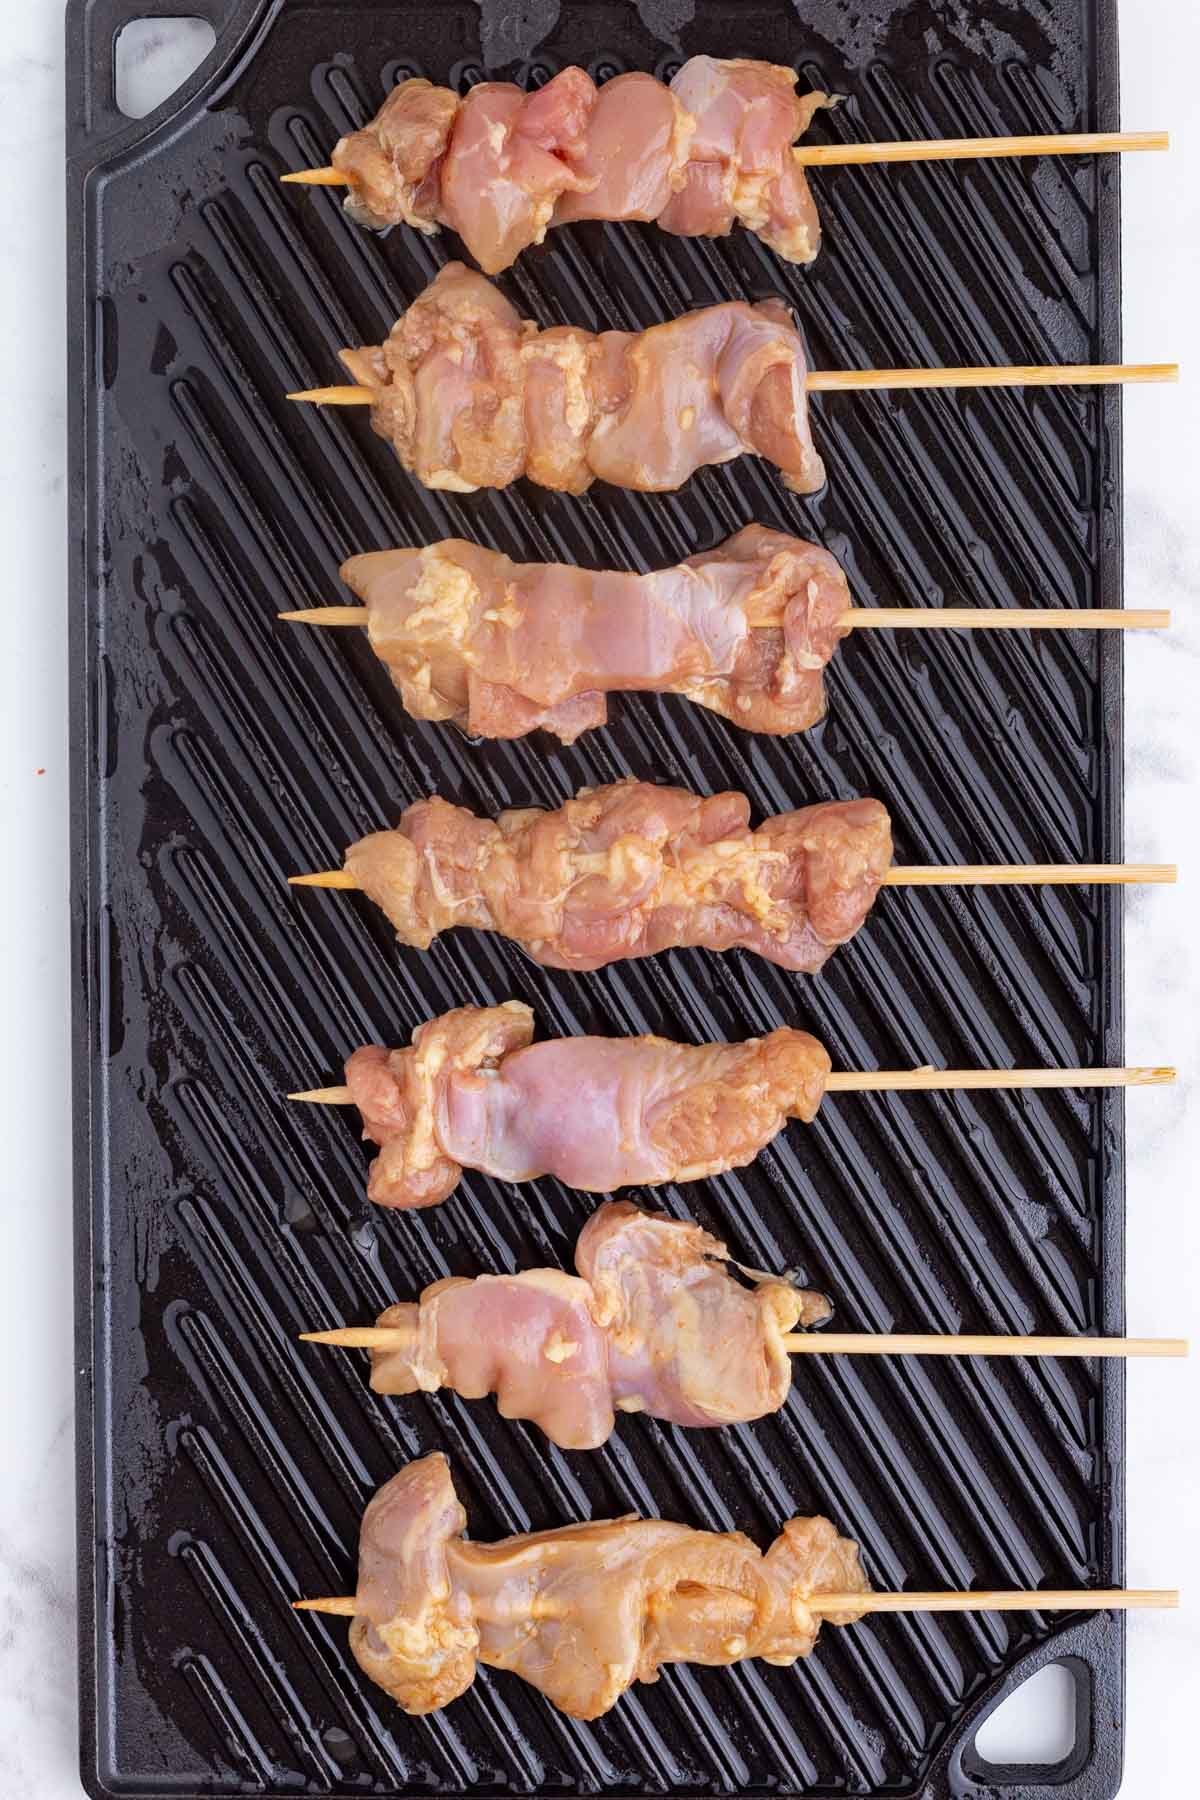 Chicken skewers are placed on a grill plate.